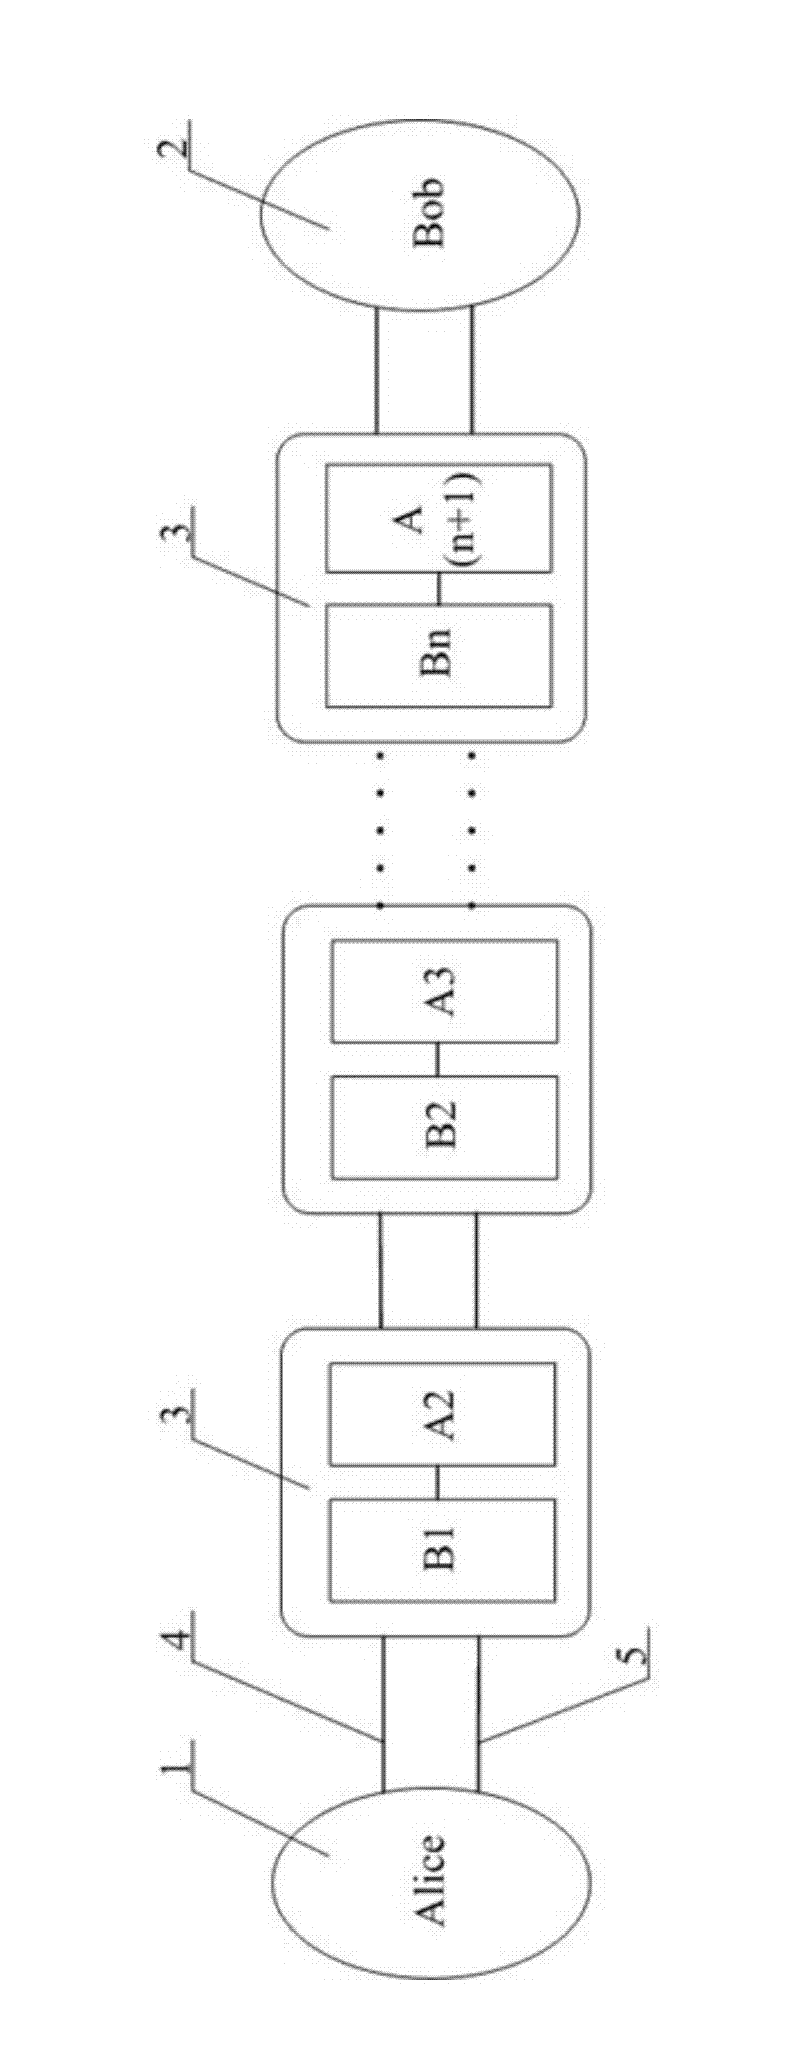 Relaying method for remote secure quantum communication